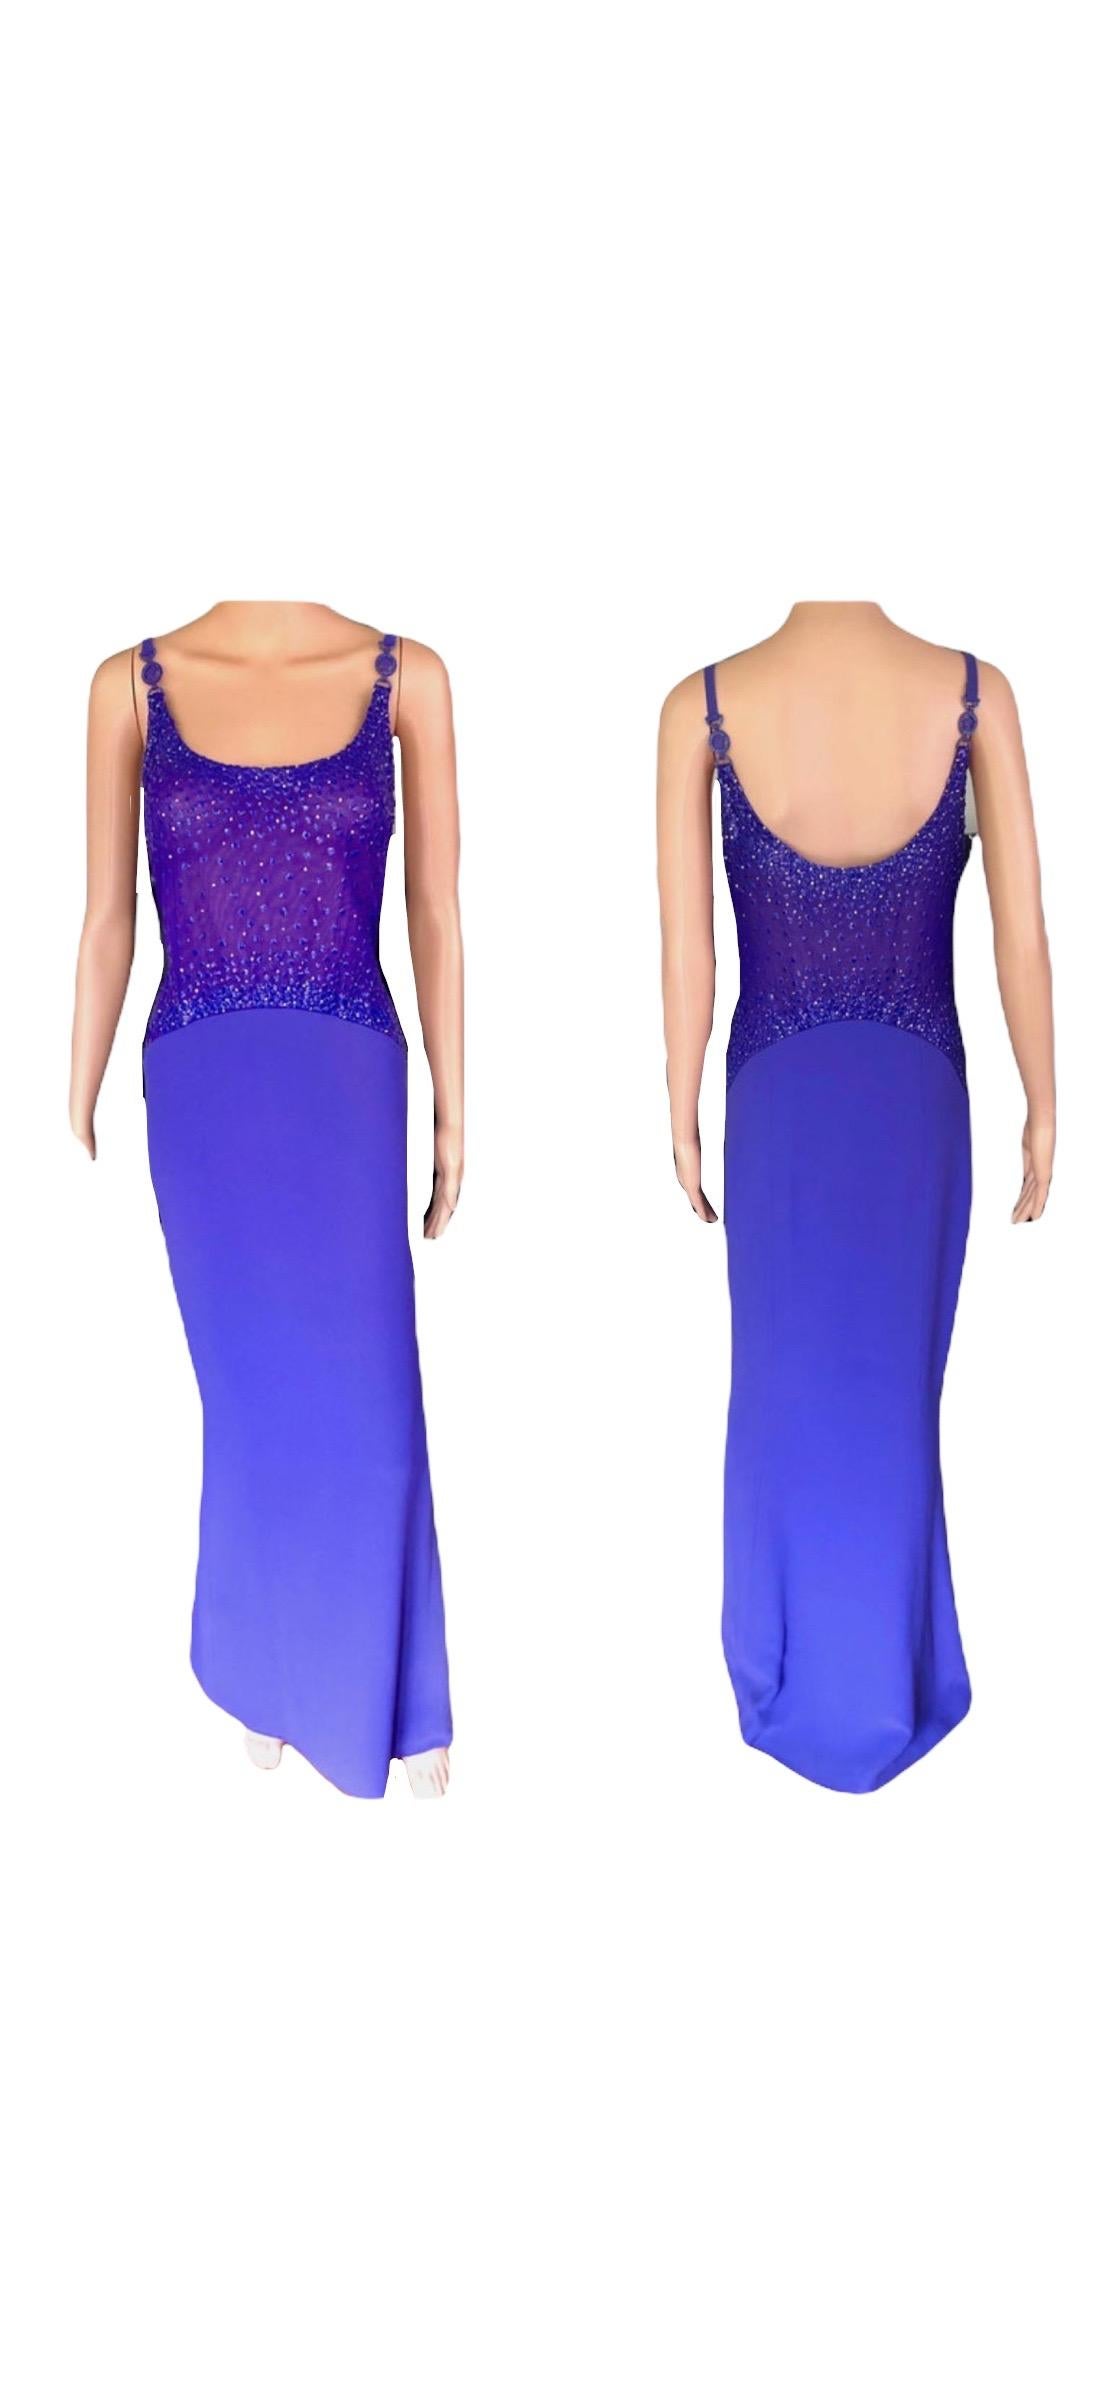 Gianni Versace F/W 1996 Runway Vintage Embellished Sheer Evening Dress Gown In Good Condition For Sale In Naples, FL